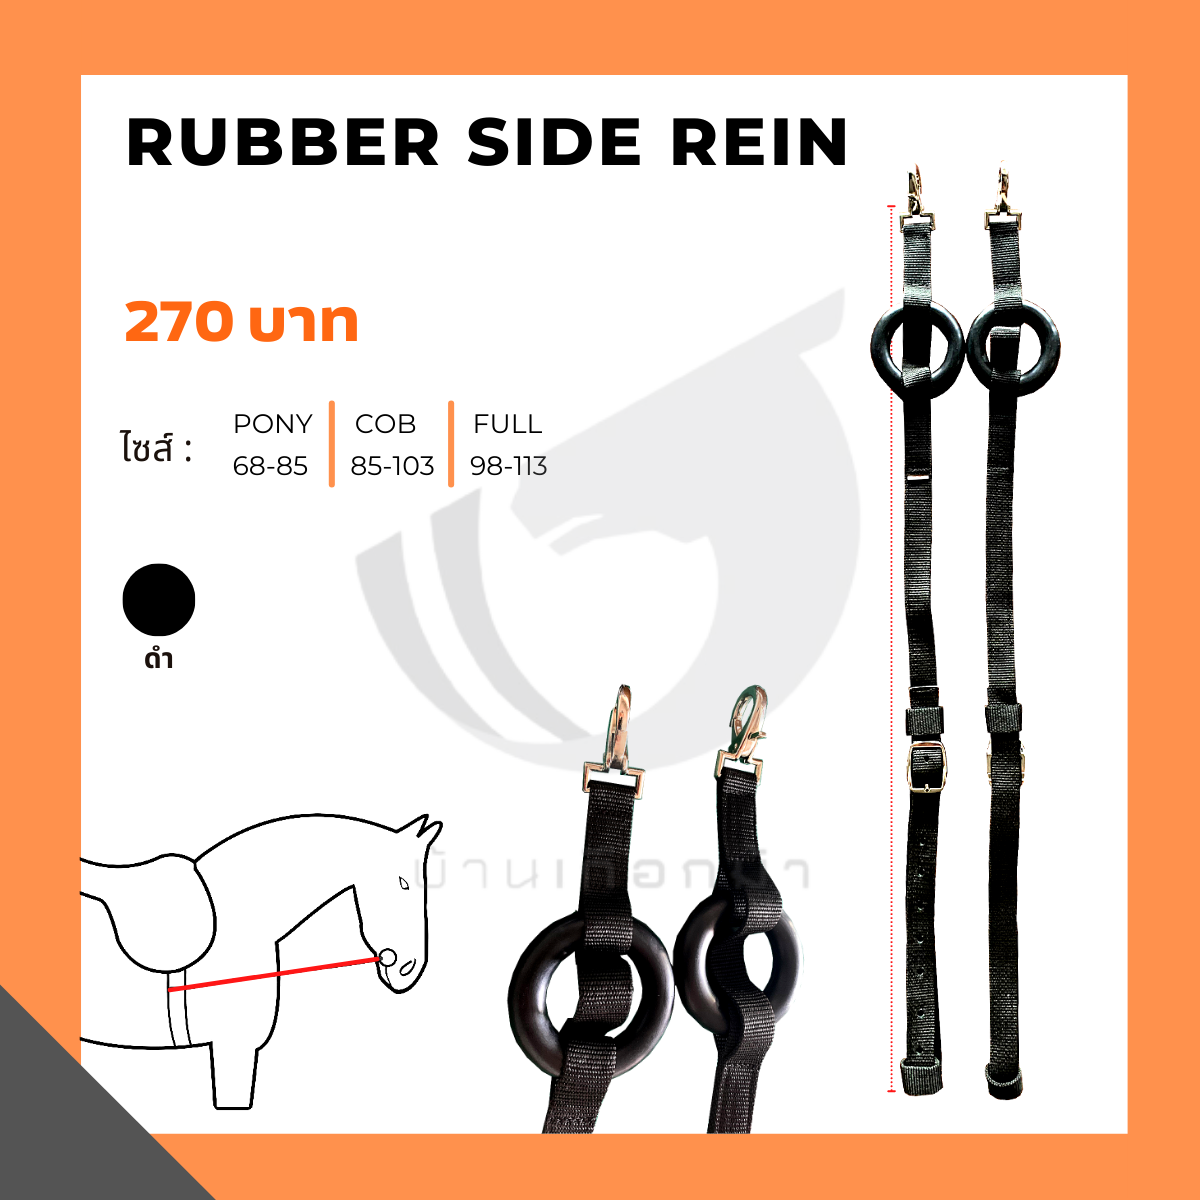 Rubber side rein/pair